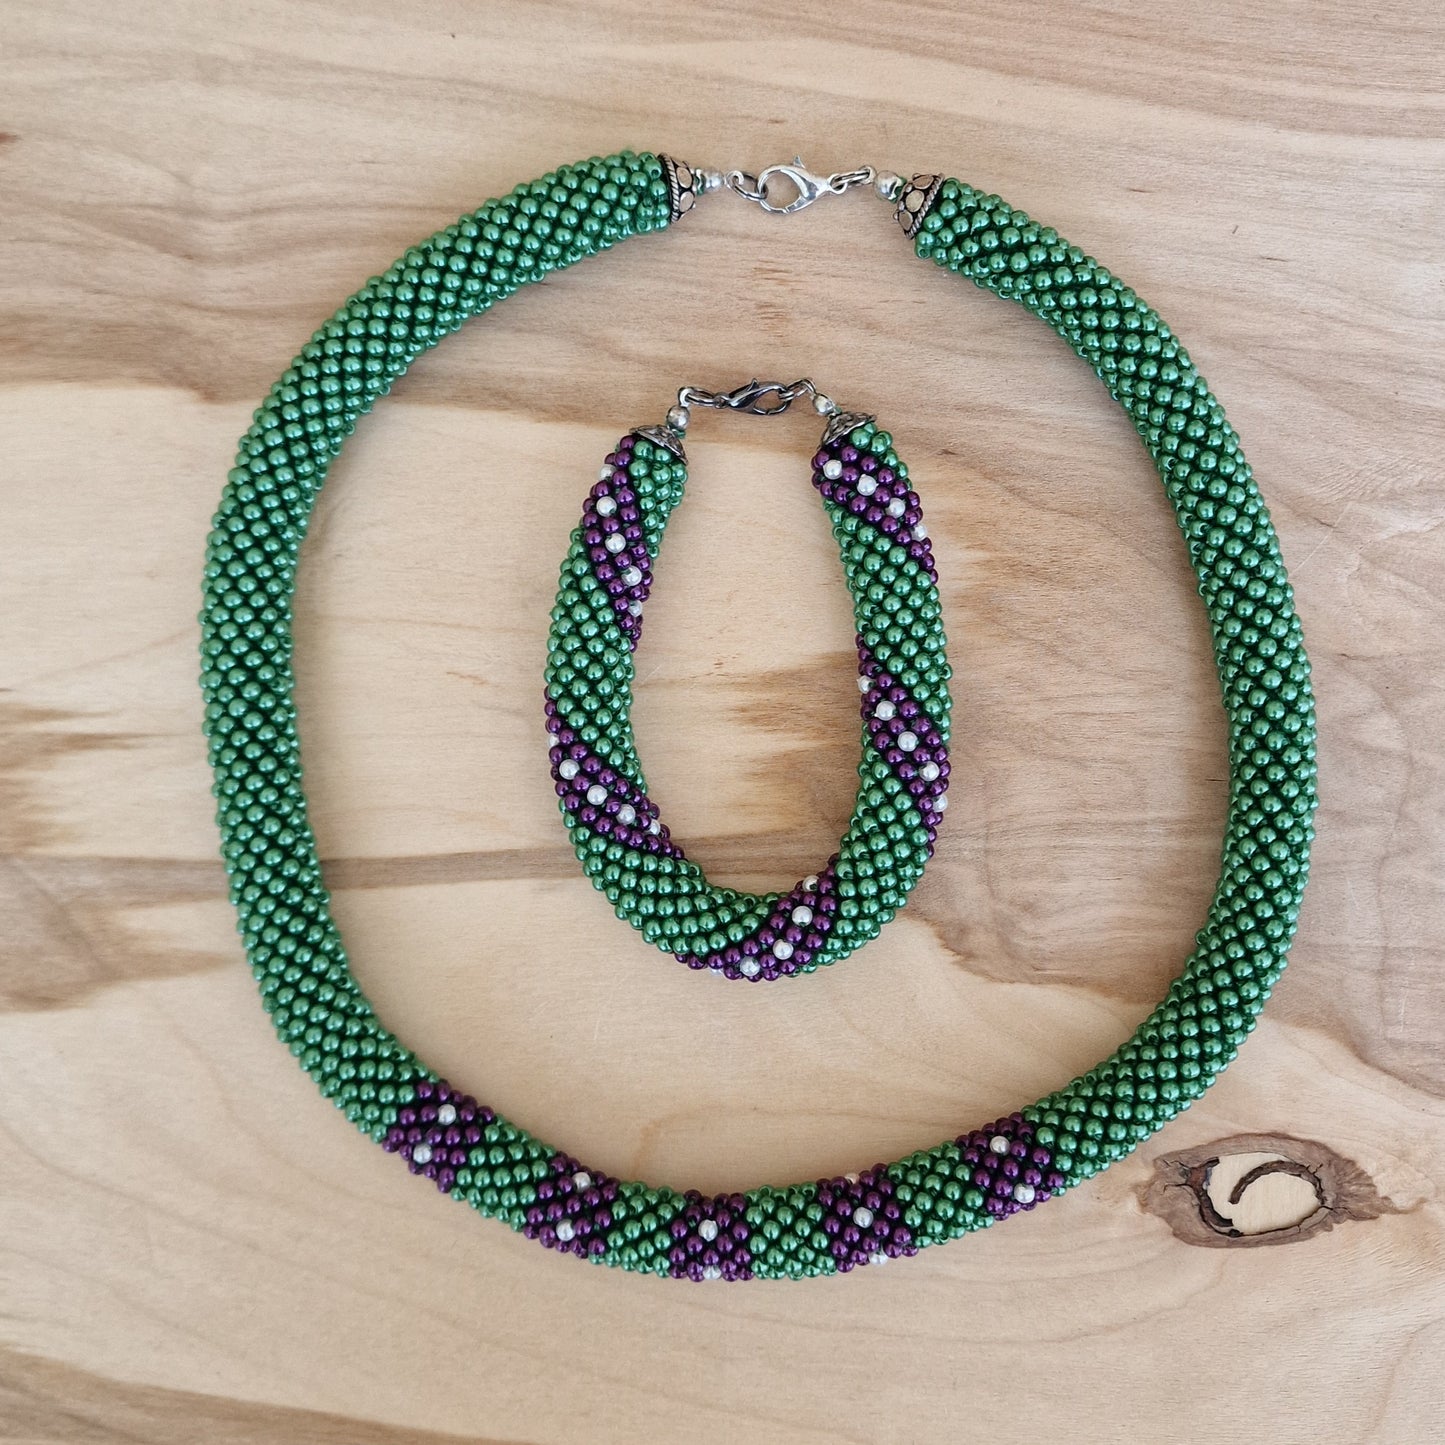 Green Pearl Jewelry Set with Purple and White Accents (DAMI 26)